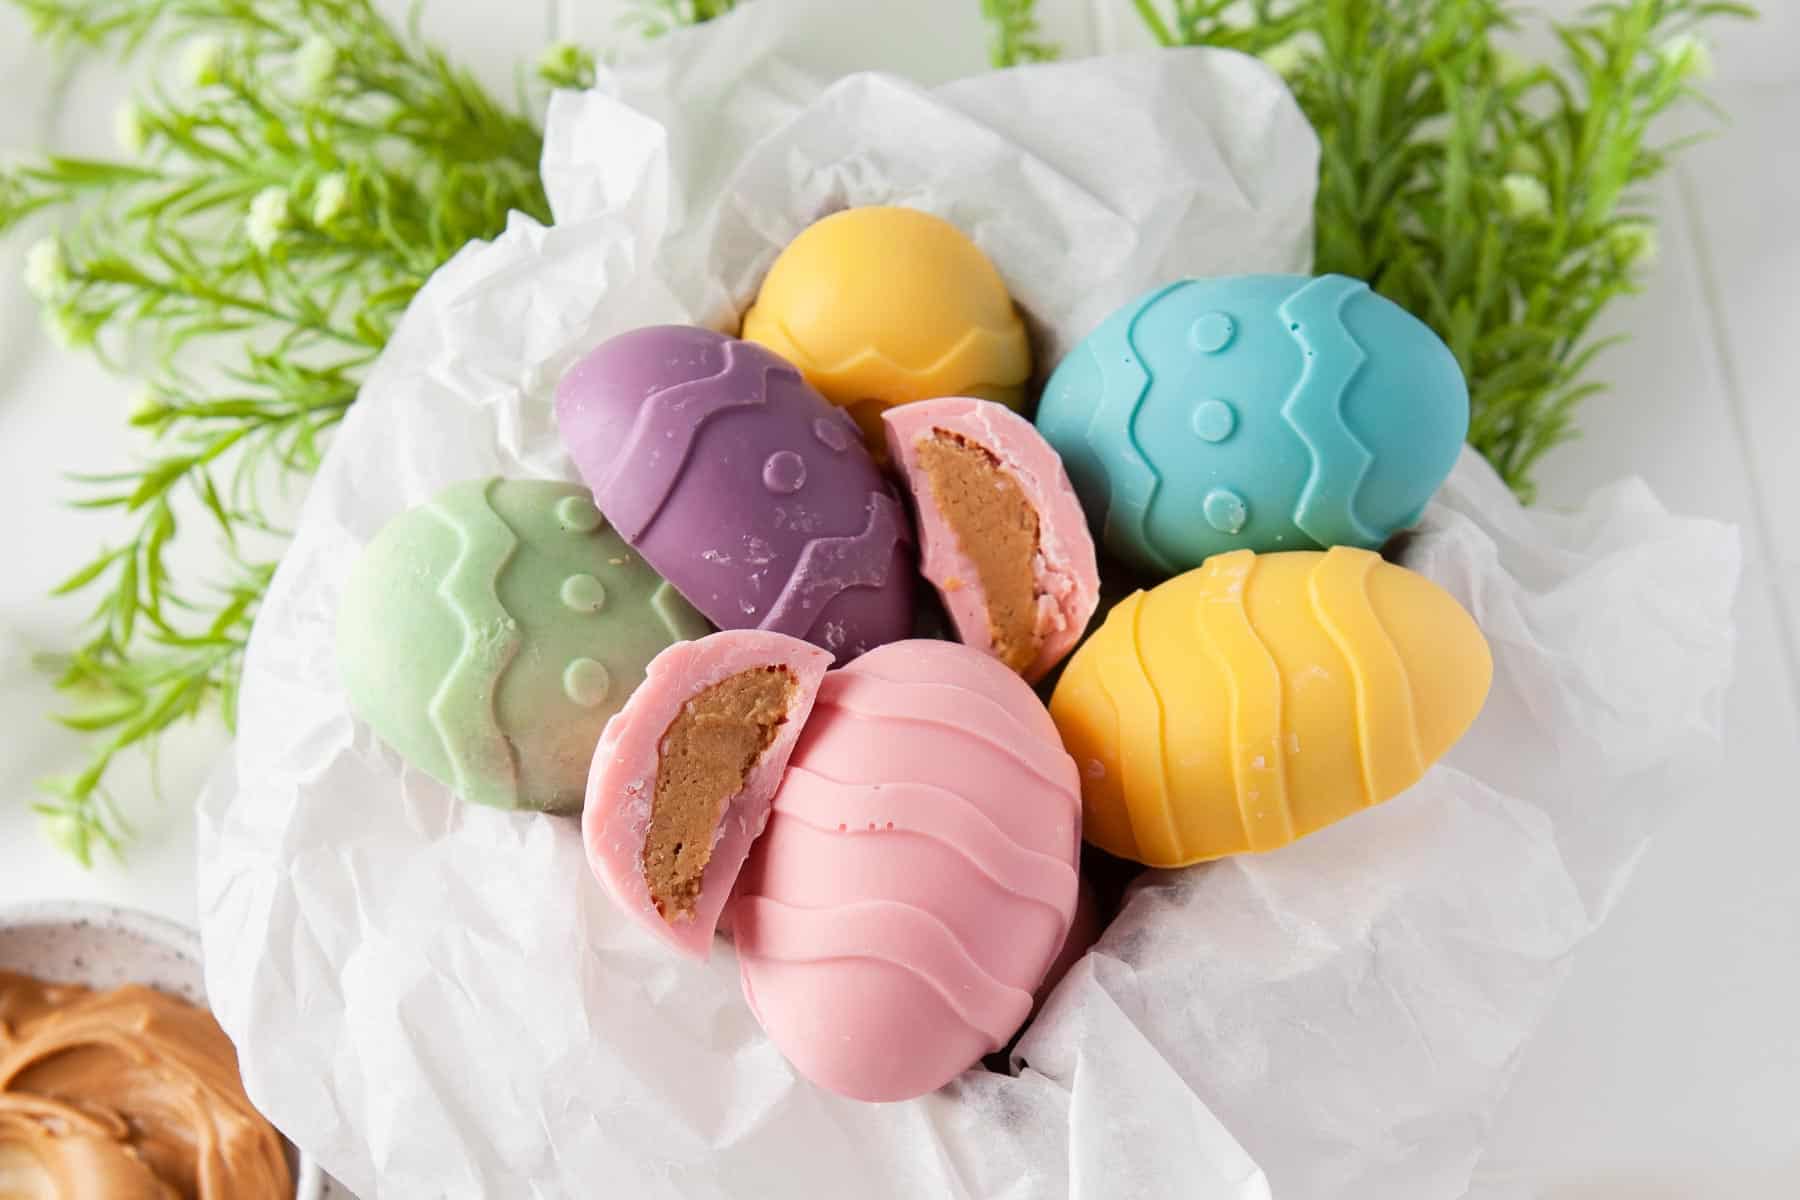 Peanut butter eggs covered in pastel-colored white chocolate with one cut in half.